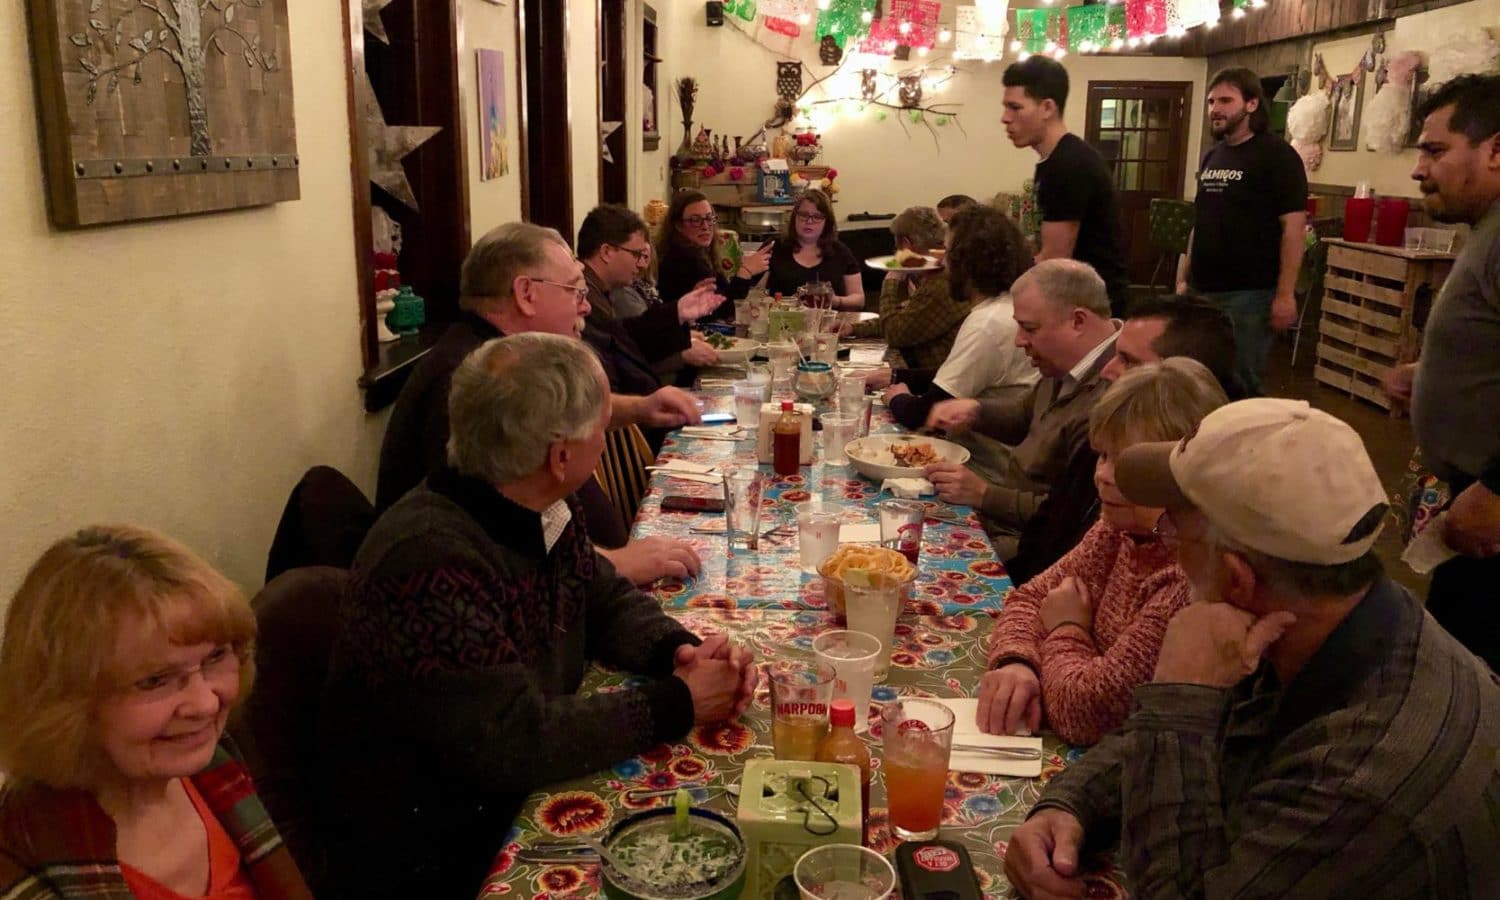 Rhode Island News: Climate Action RI responds to State Senator Elaine Morgan with dinner at Amigos Taqueria Y Tequila